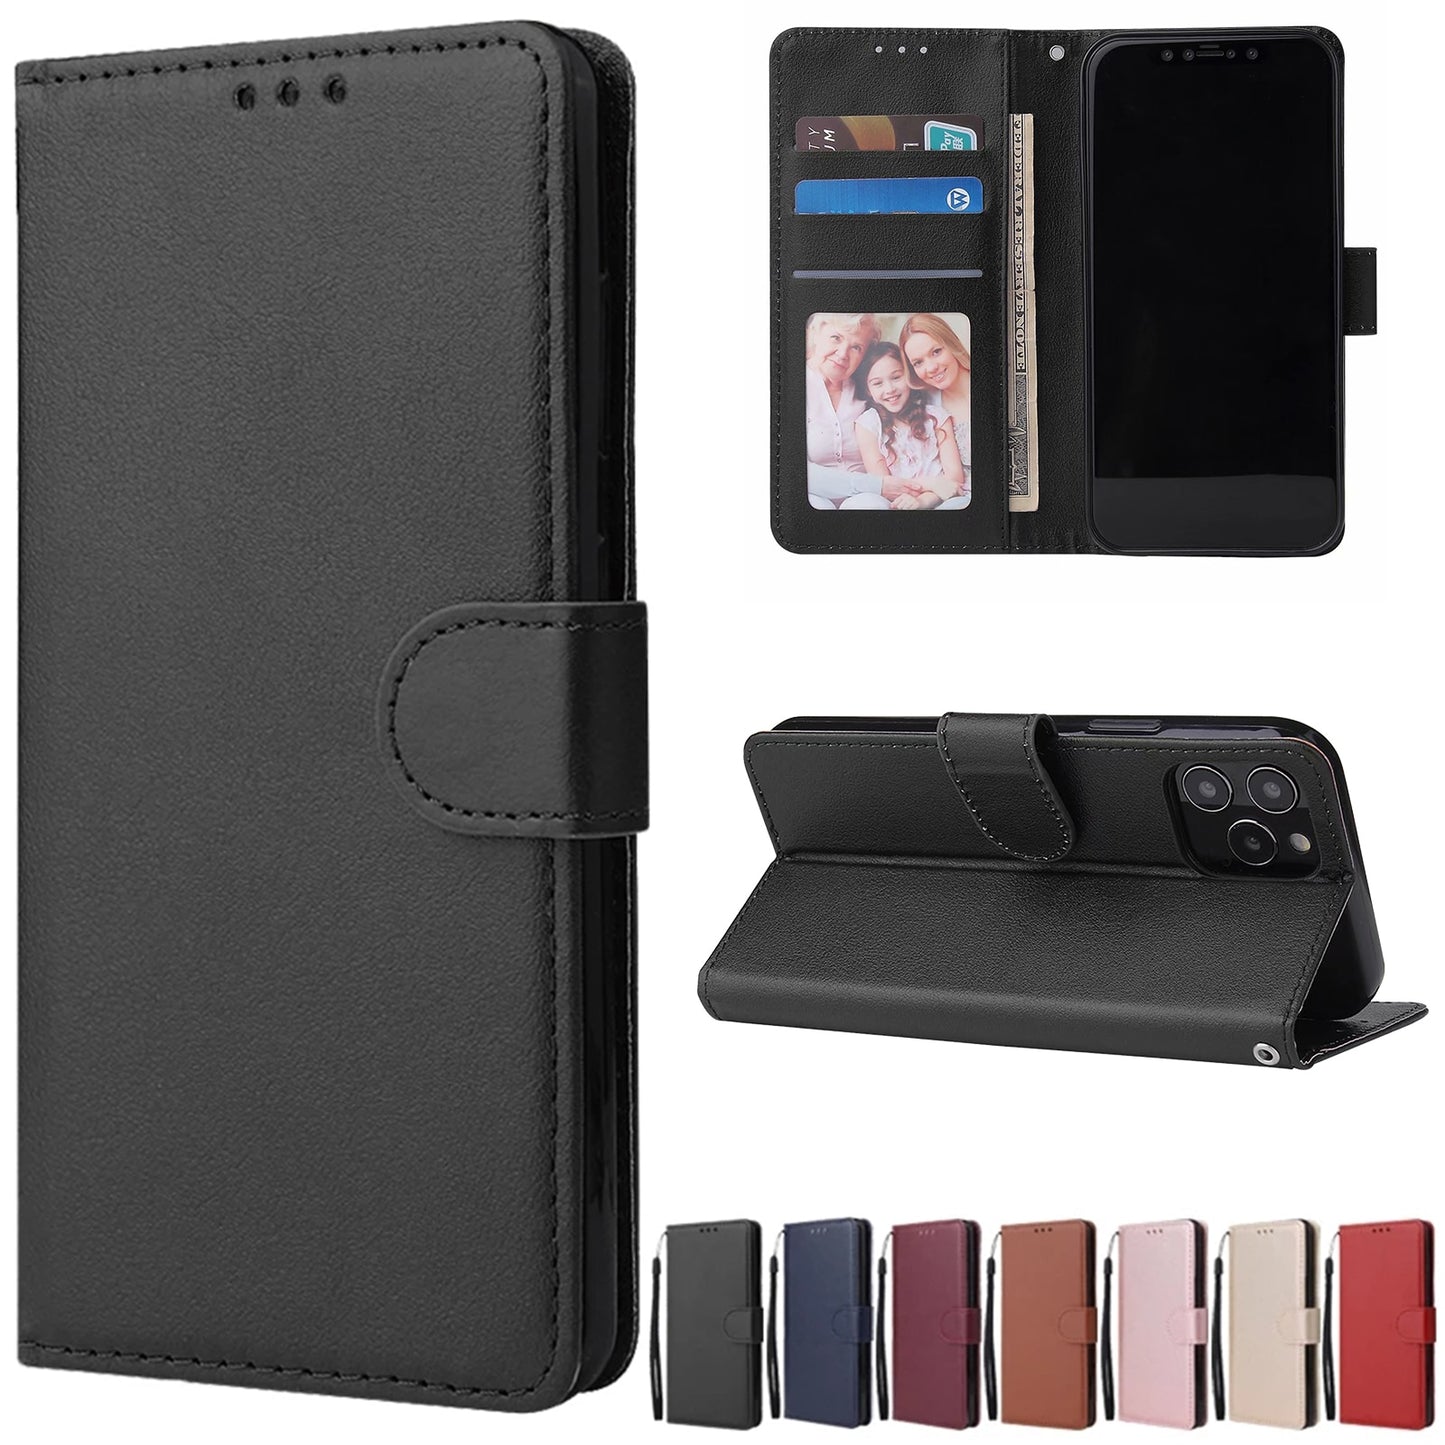 iPhone 11 Series Leather Flip Wallet Case